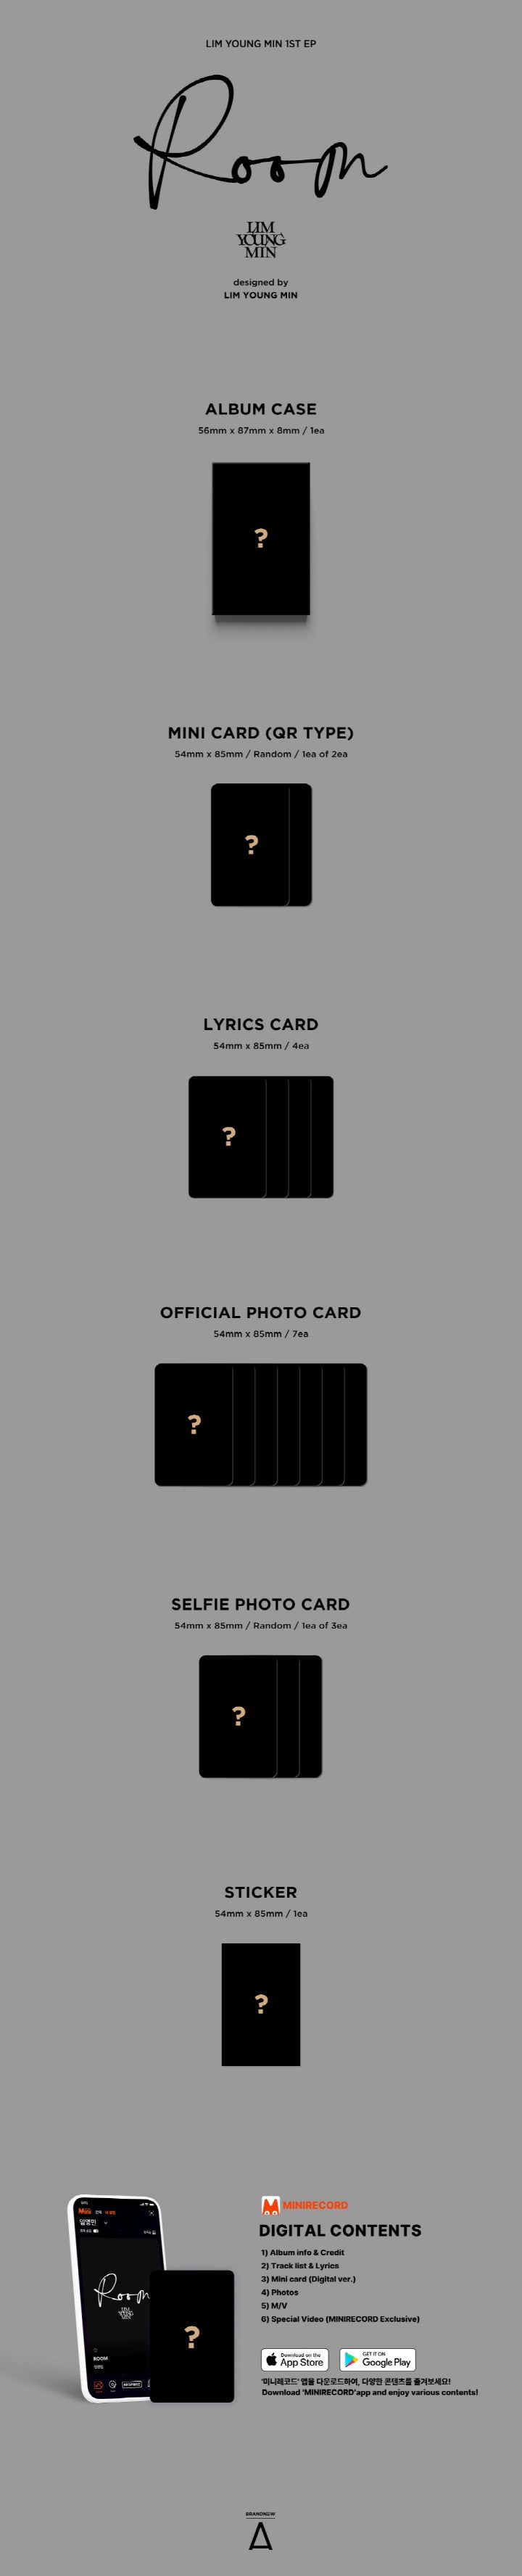 1 Mini Card (QR type, random out of 2 types)
4 Lyrics Cards
7 Official Photo Cards
1 Selfie Photo Card (random out of 3 ty...